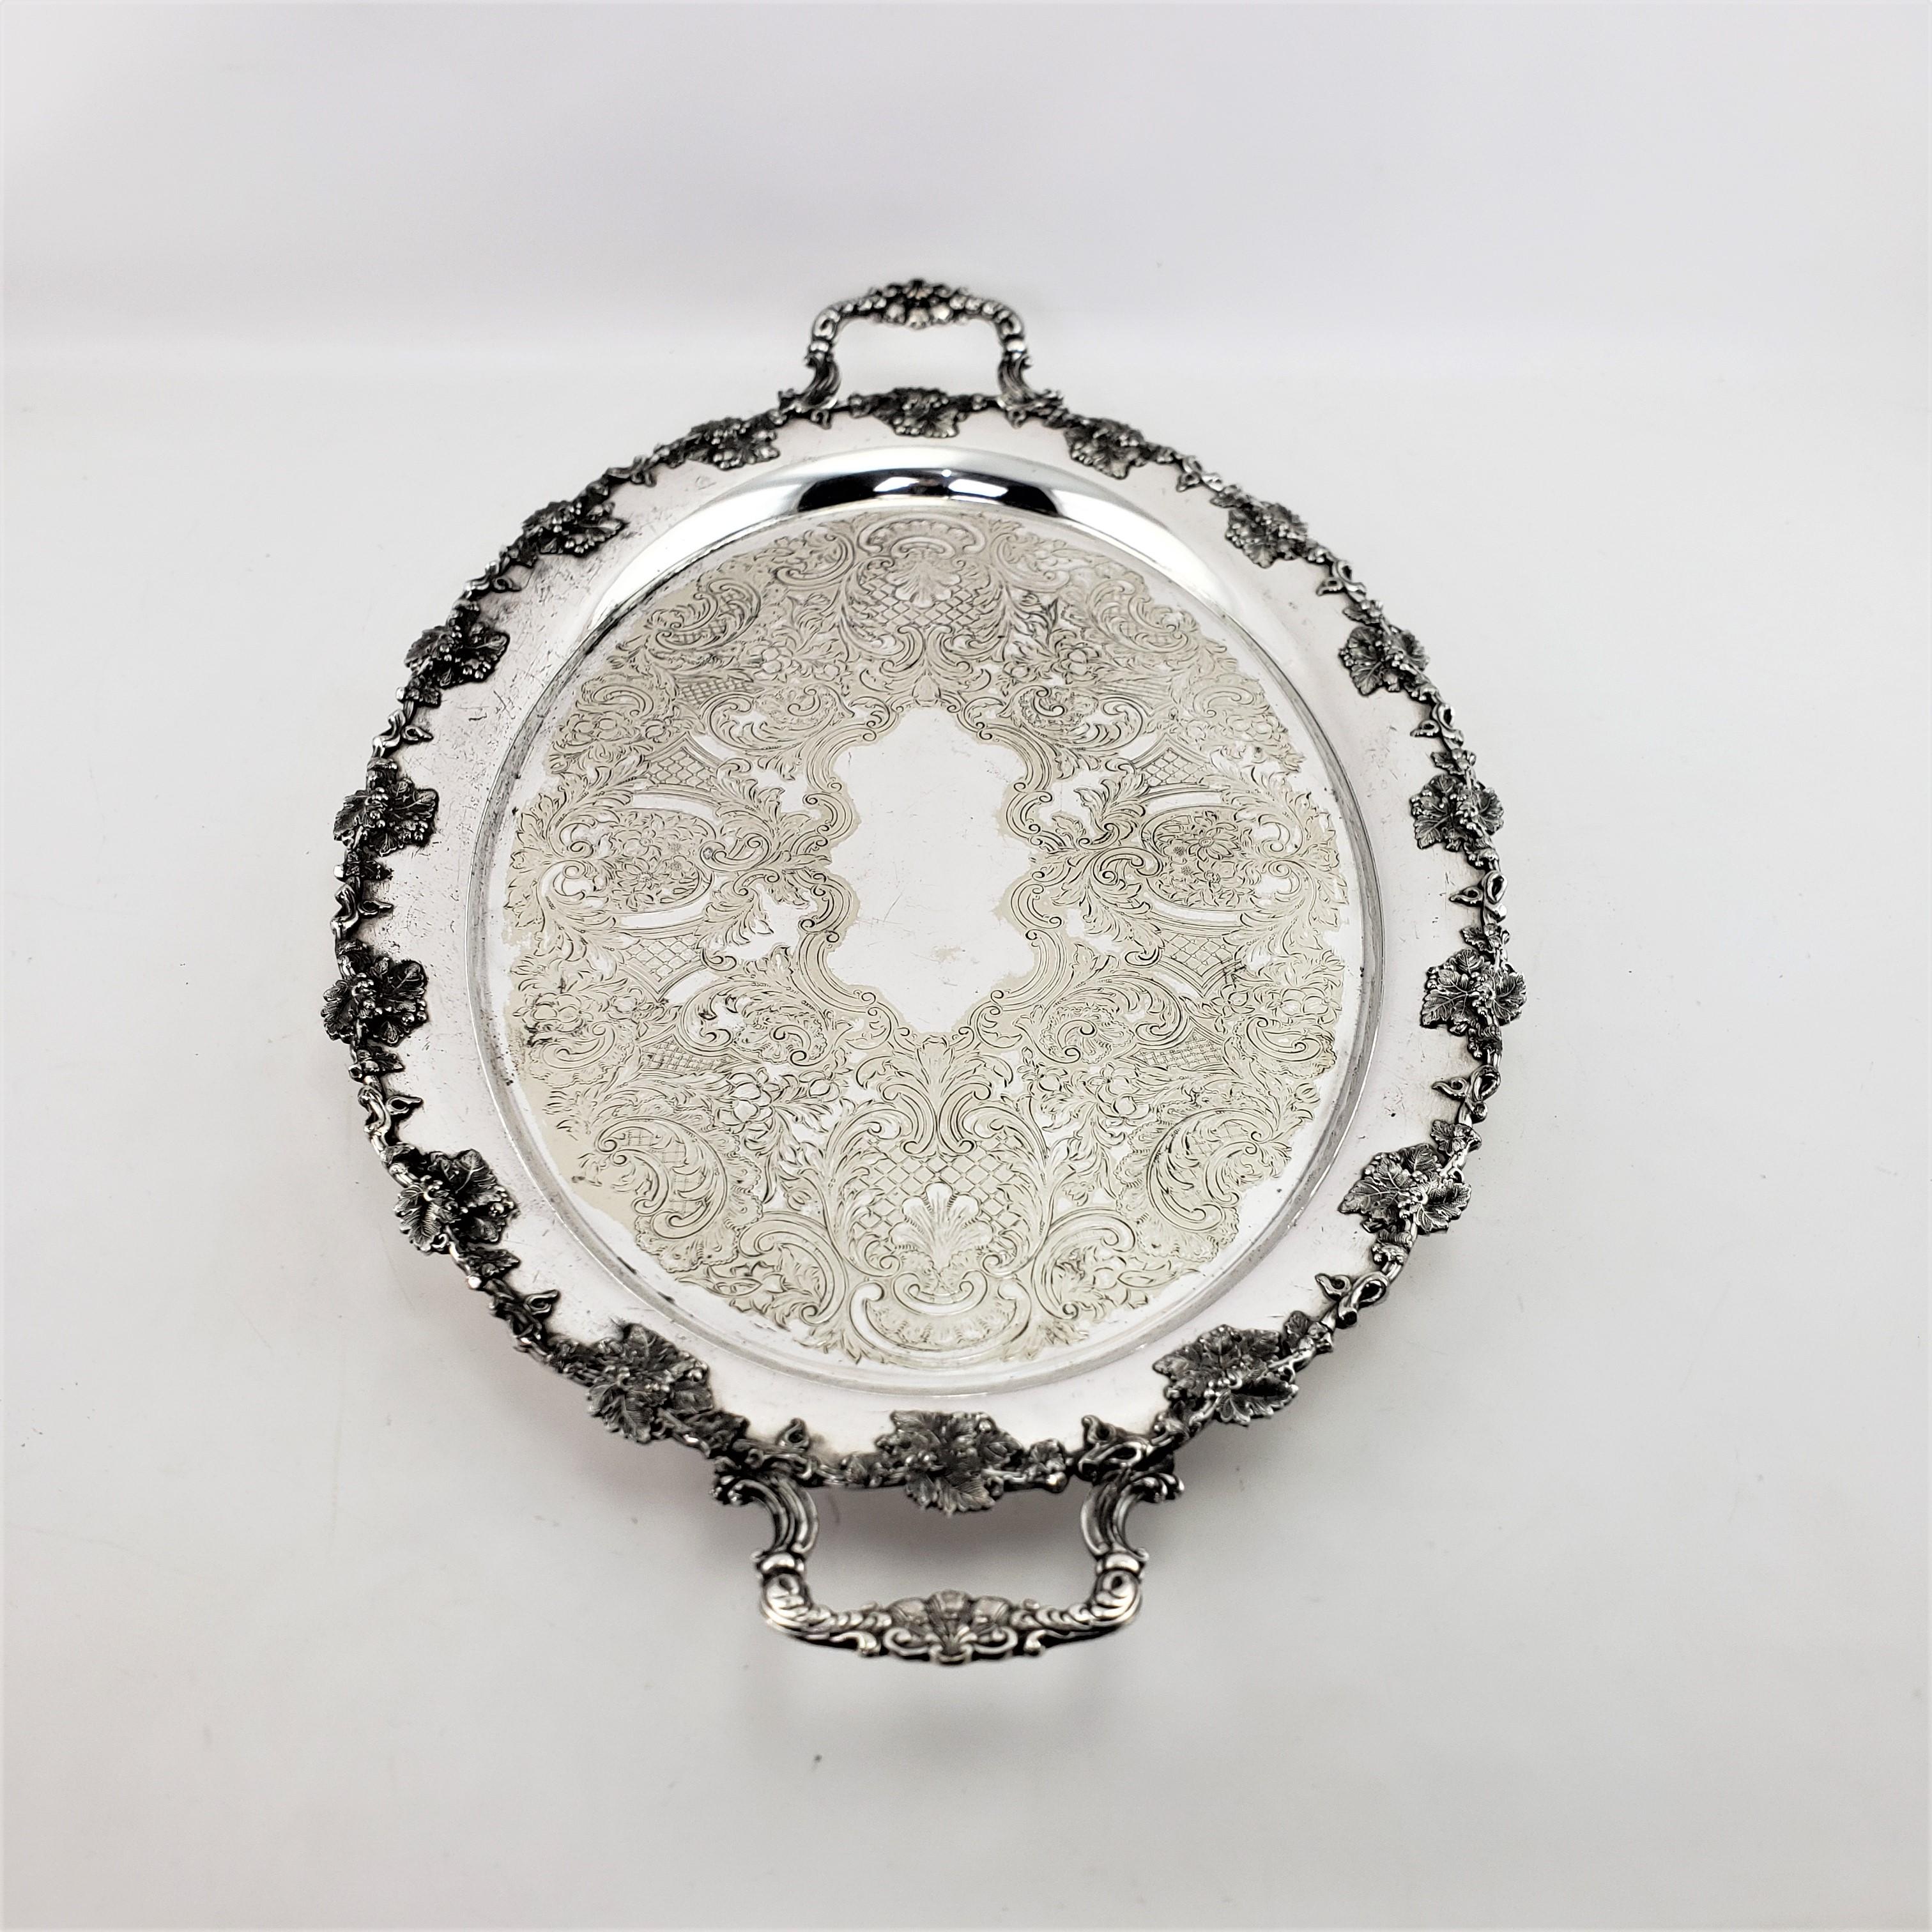 English Large Antique Barker-Ellis Silver Plated Serving Tray with Berry & Leaf Decor